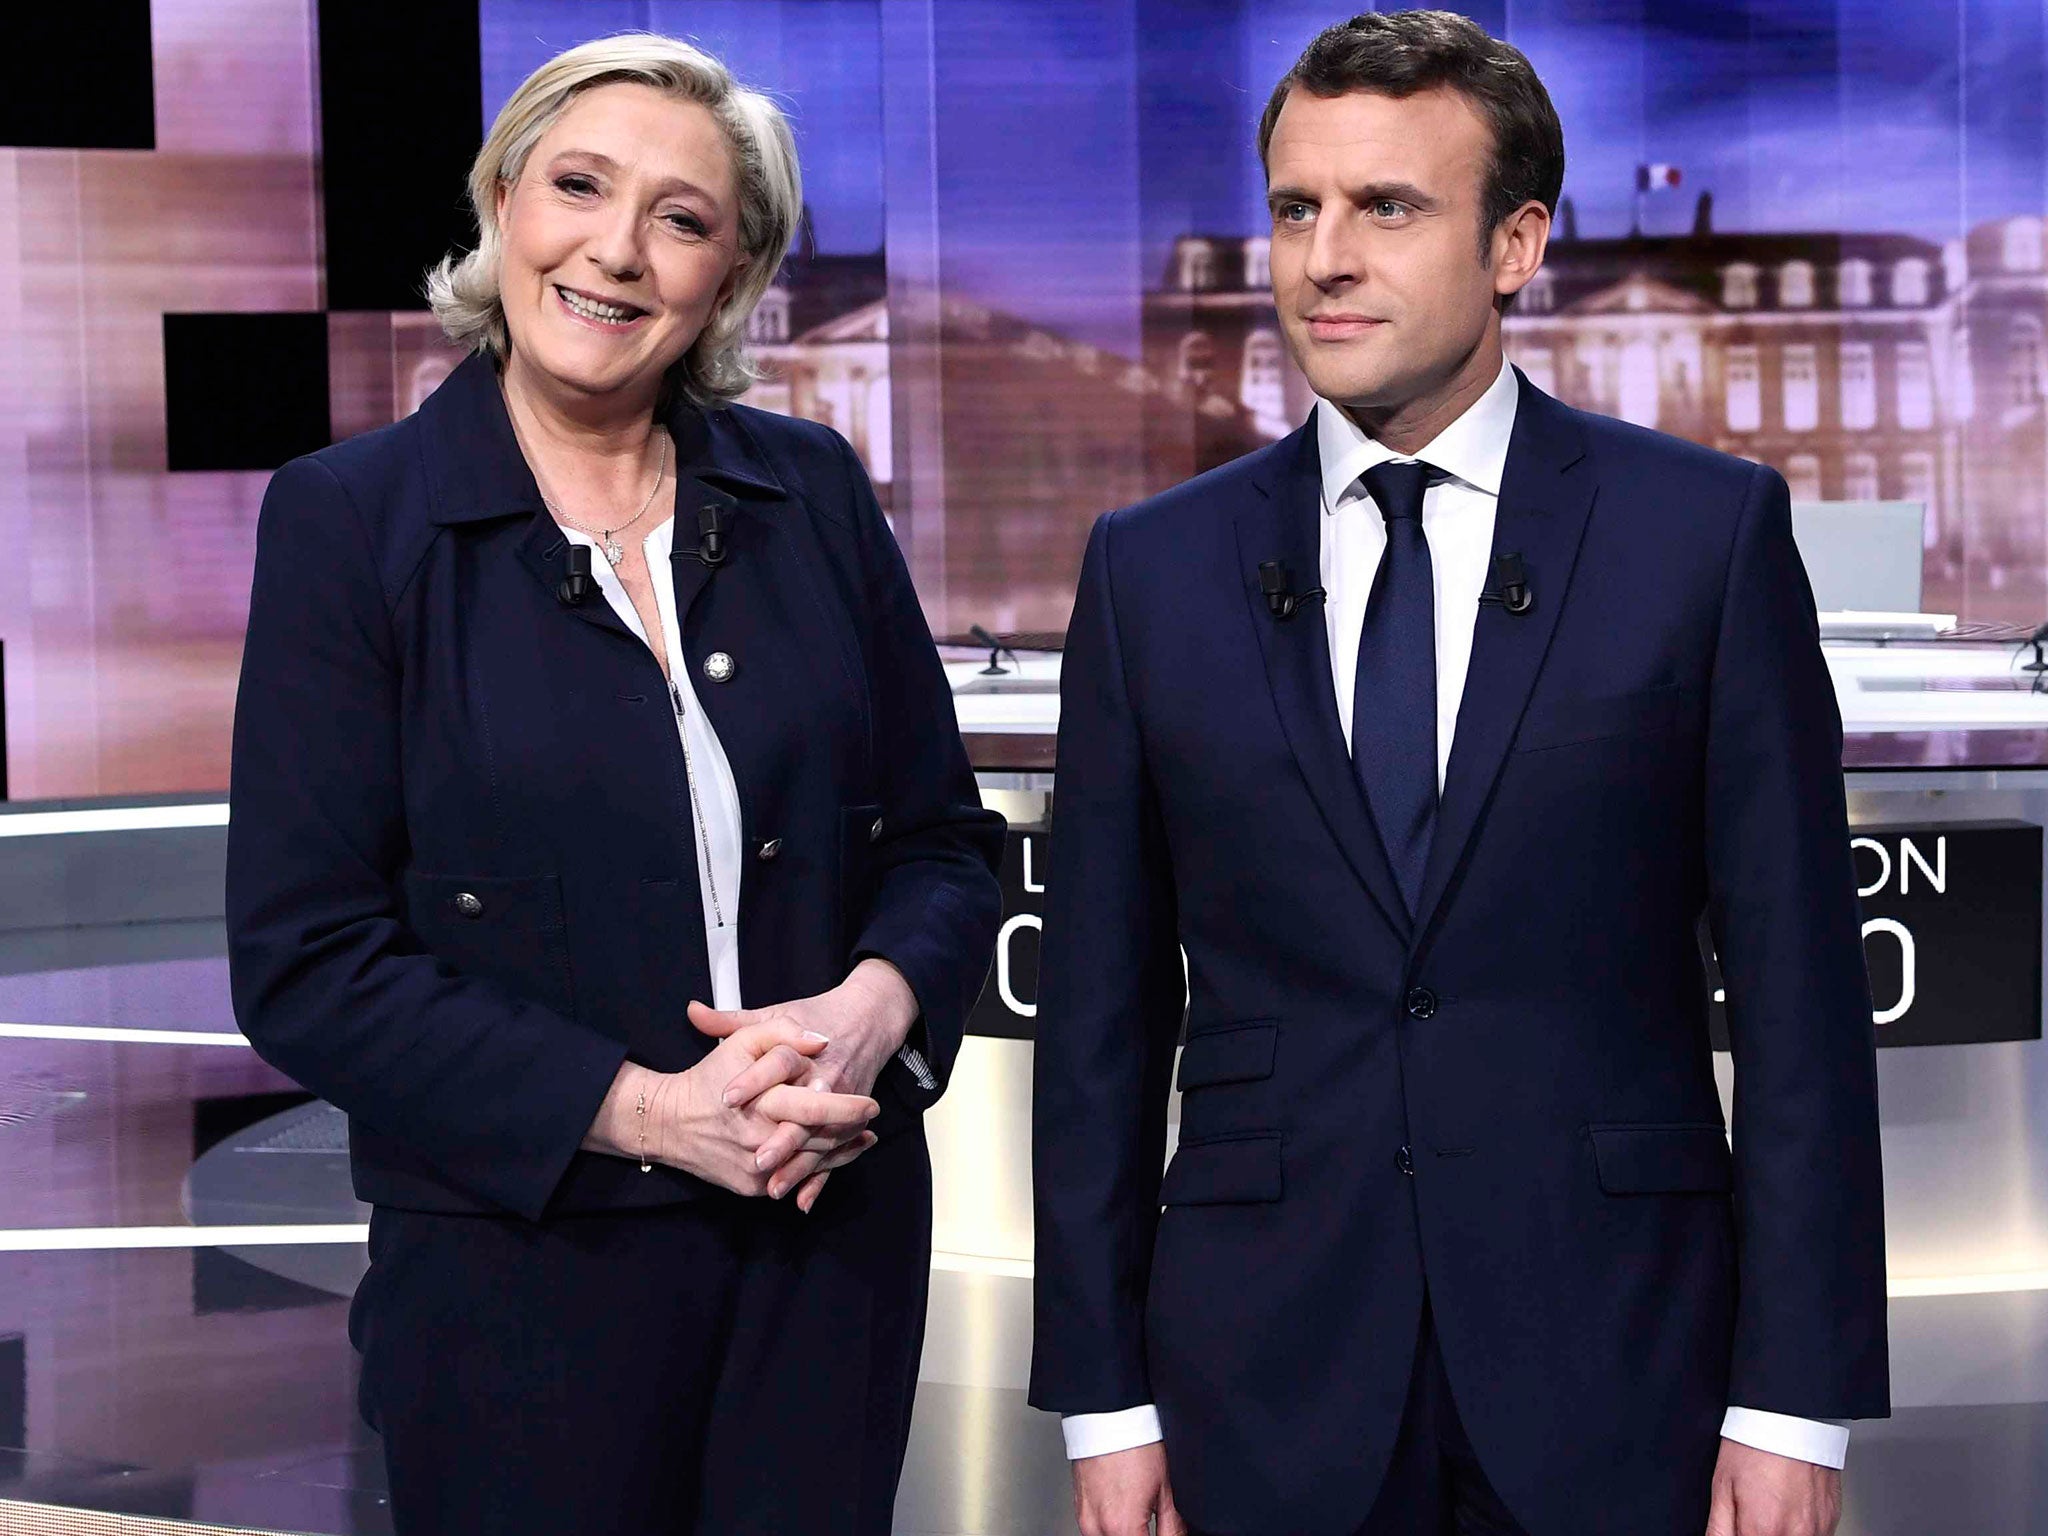 Emmanuel Macron and Marine Le Pen pose prior to the start of a television debate on 3 May